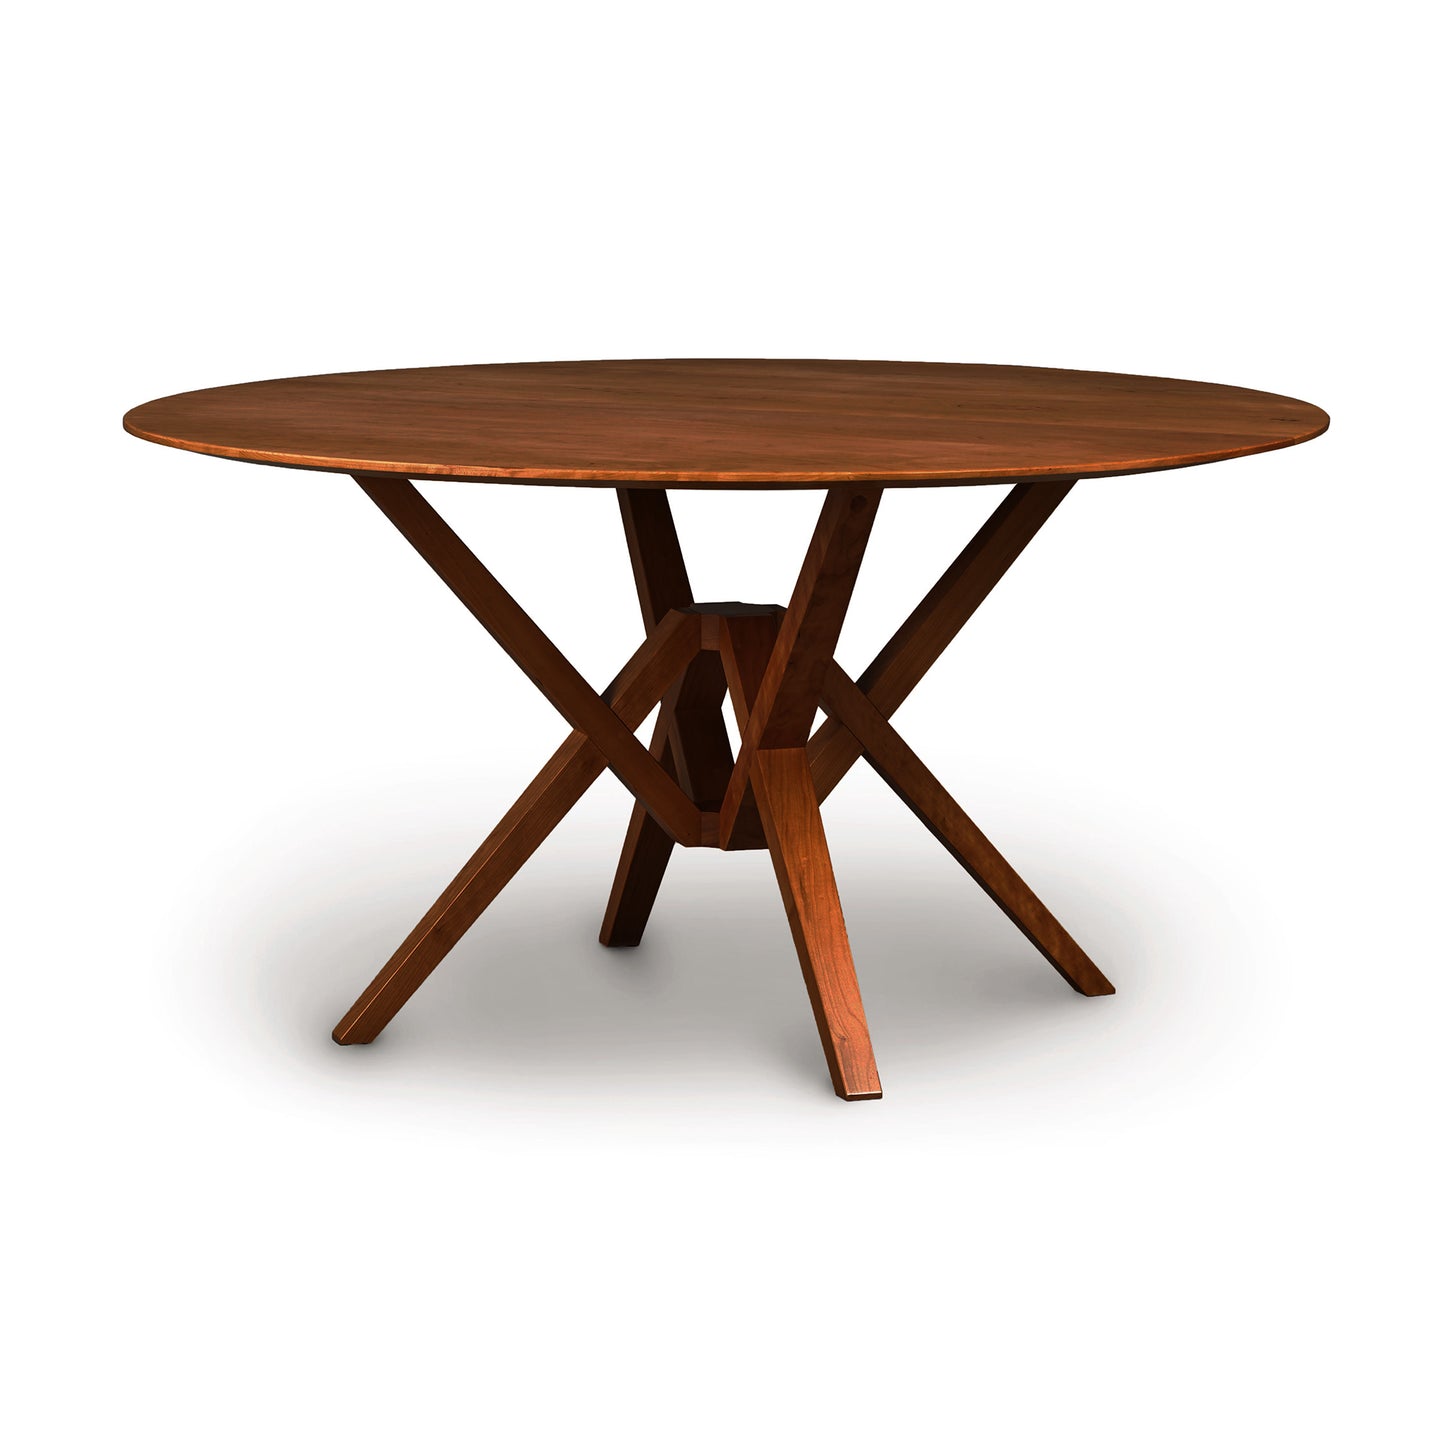 A Copeland Furniture Exeter Round Solid Top Dining Table with a cross-leg support design, crafted from sustainably harvested hardwoods, on a white background.